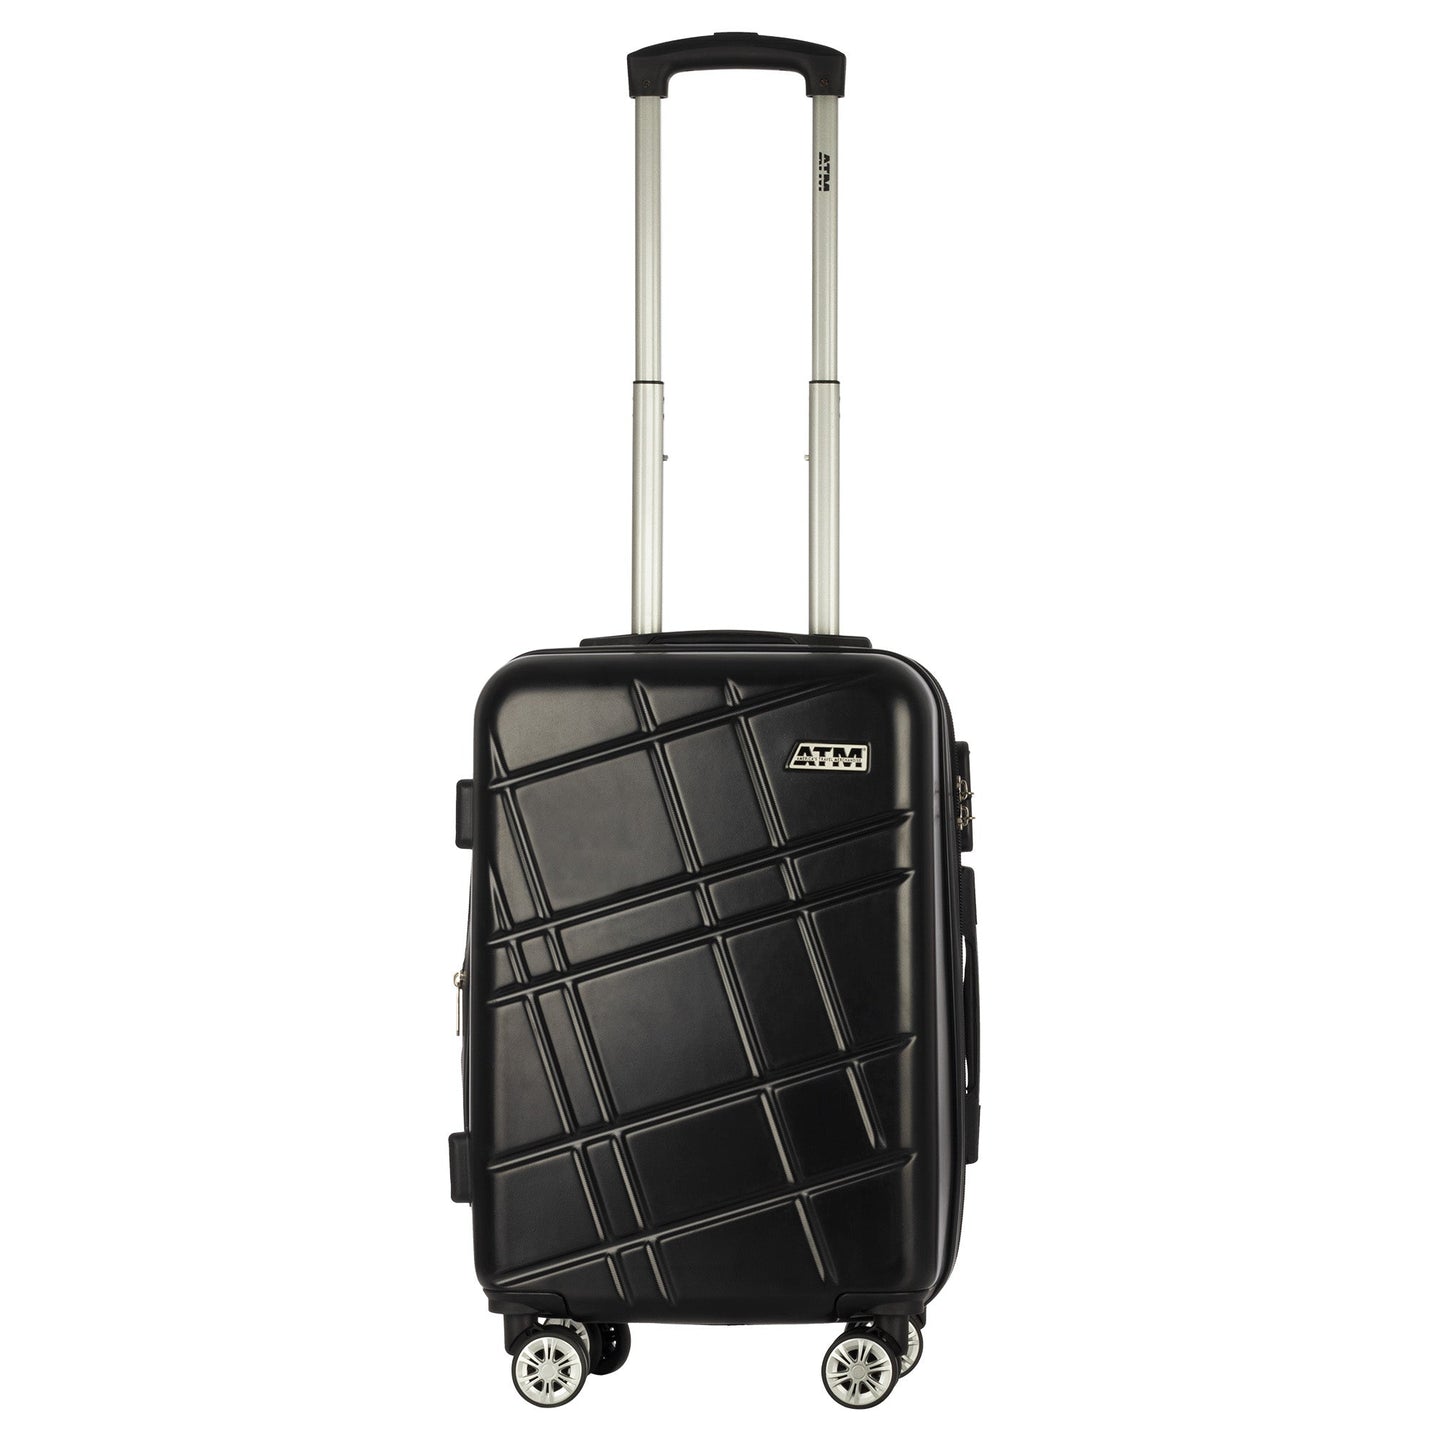 Soto collection luggage black (20") Suitcase Lock Spinner